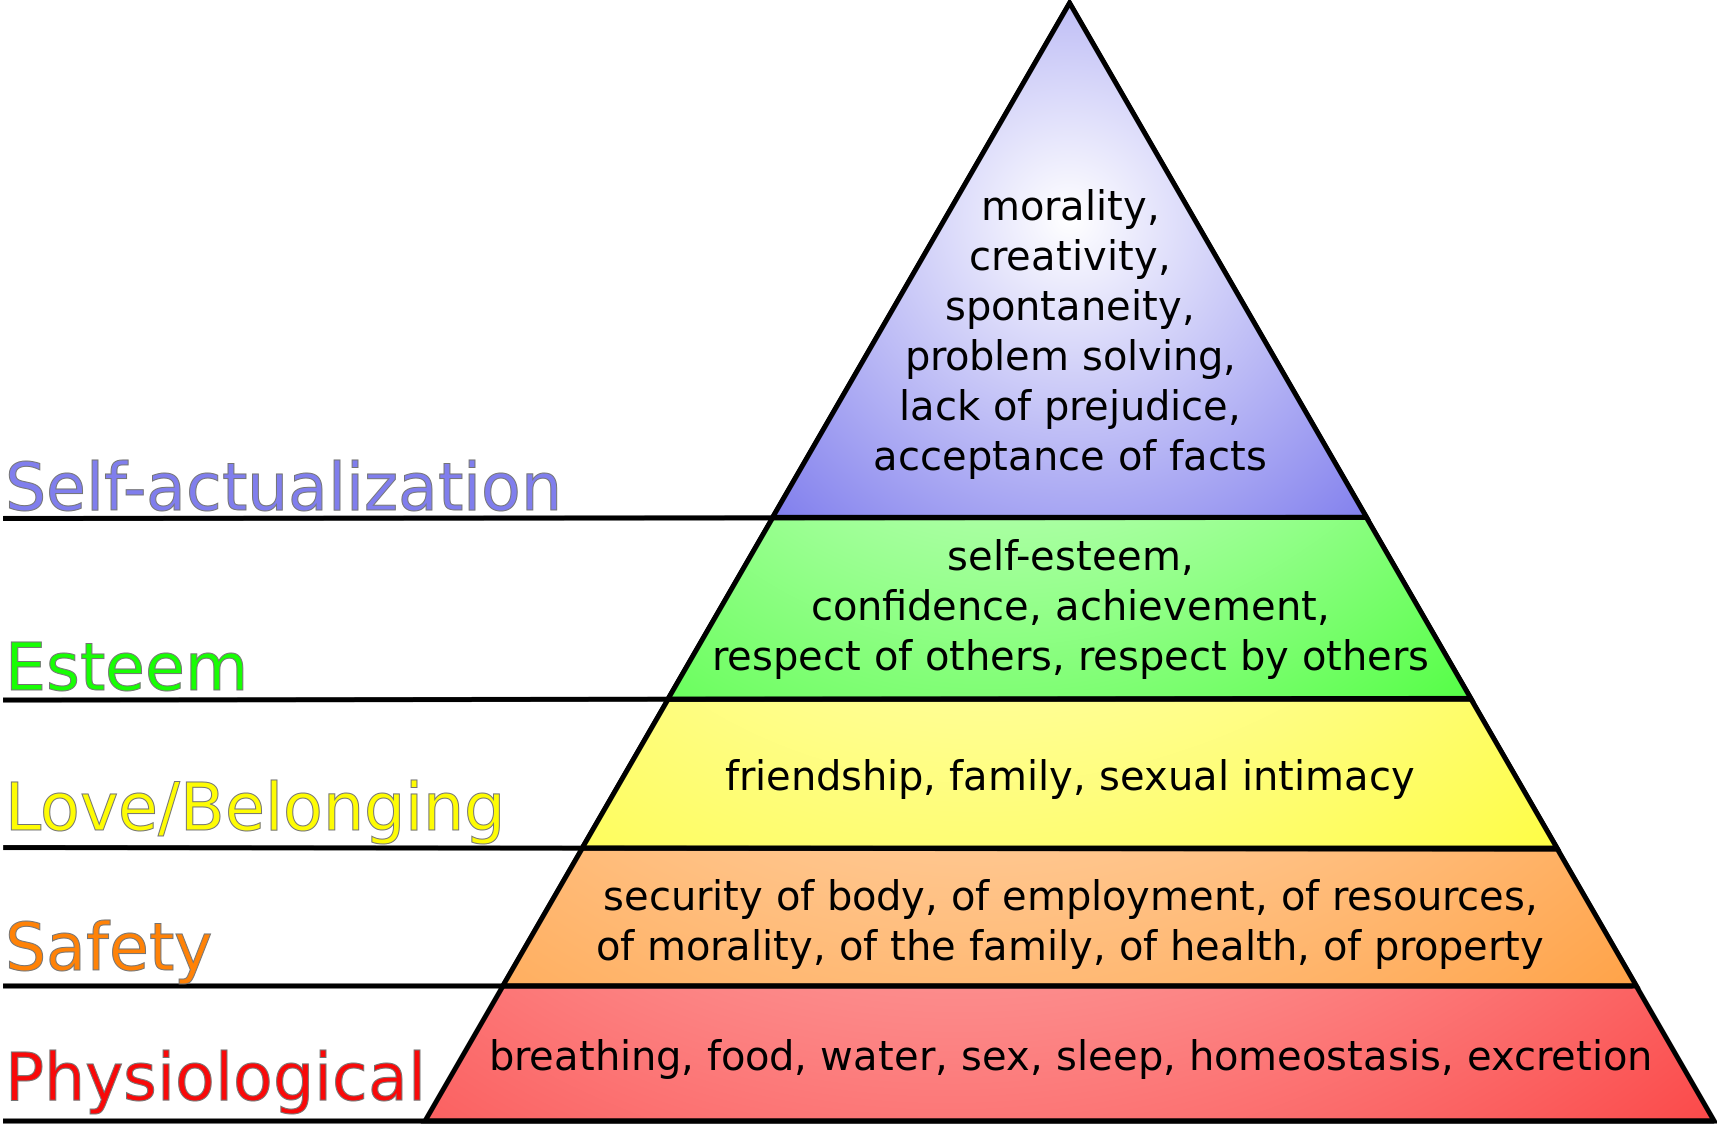 Image showing Maslow's hierarchy of needs